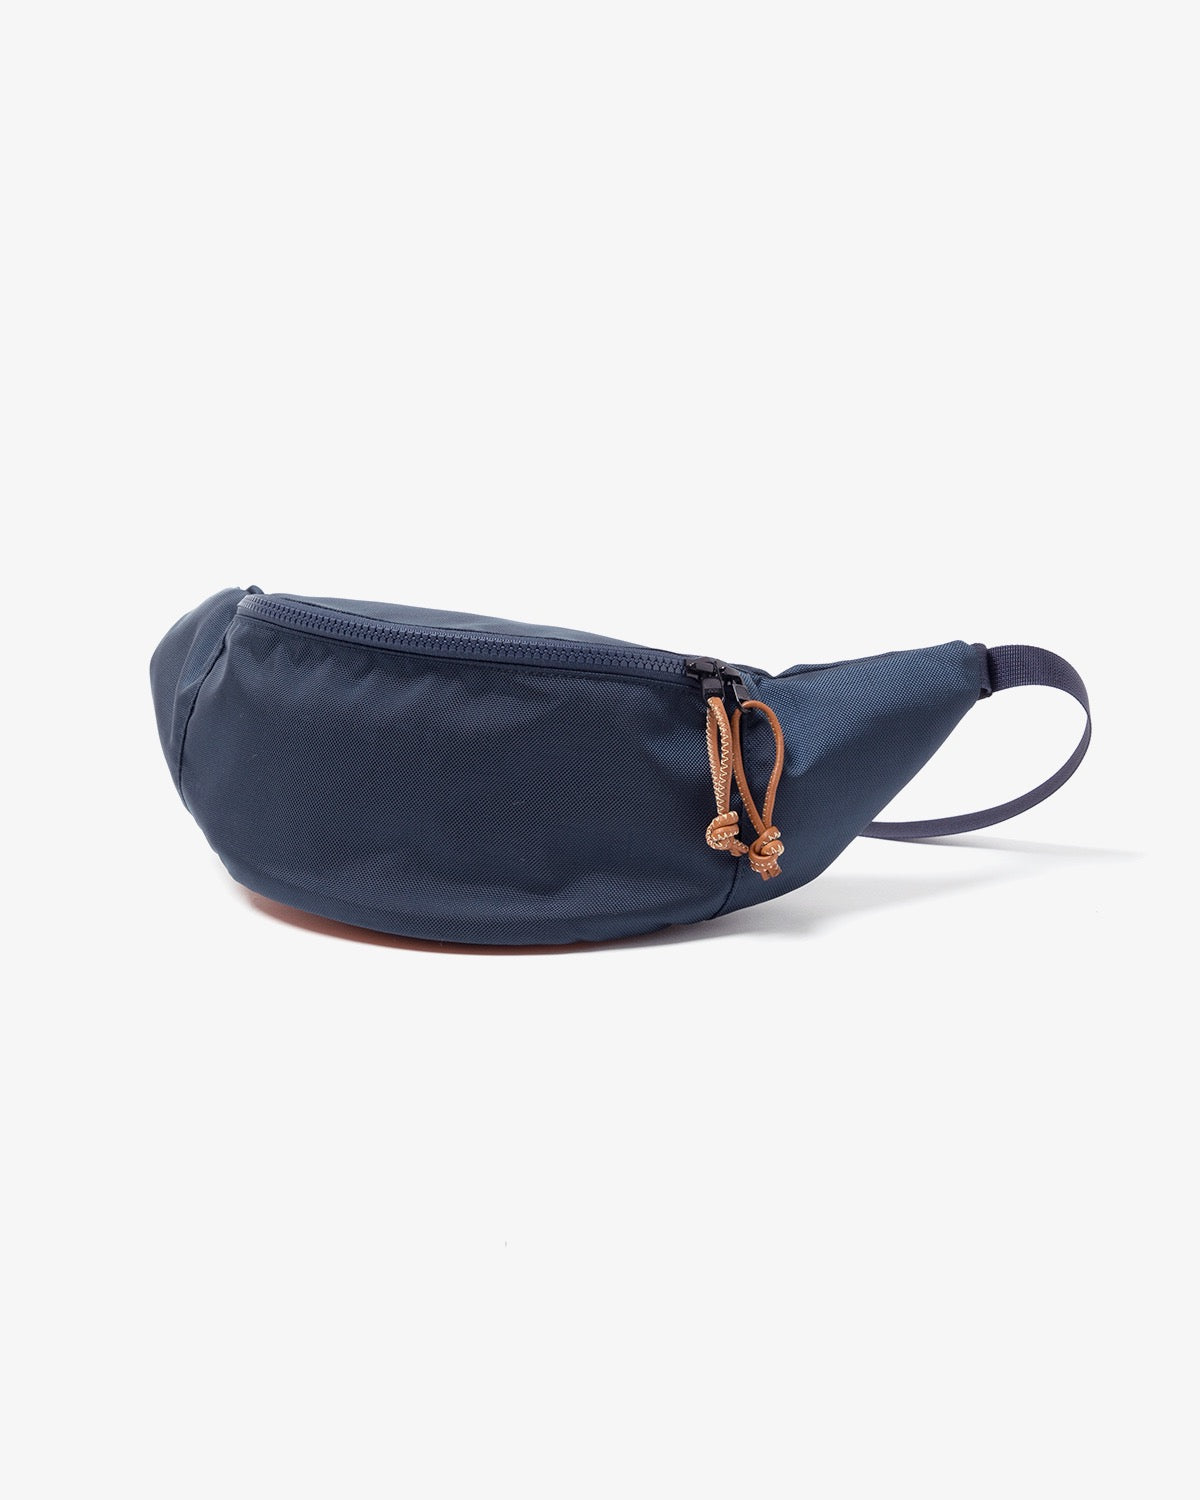 WAIST POUCH NYLON OXFORD with COW SUEDE